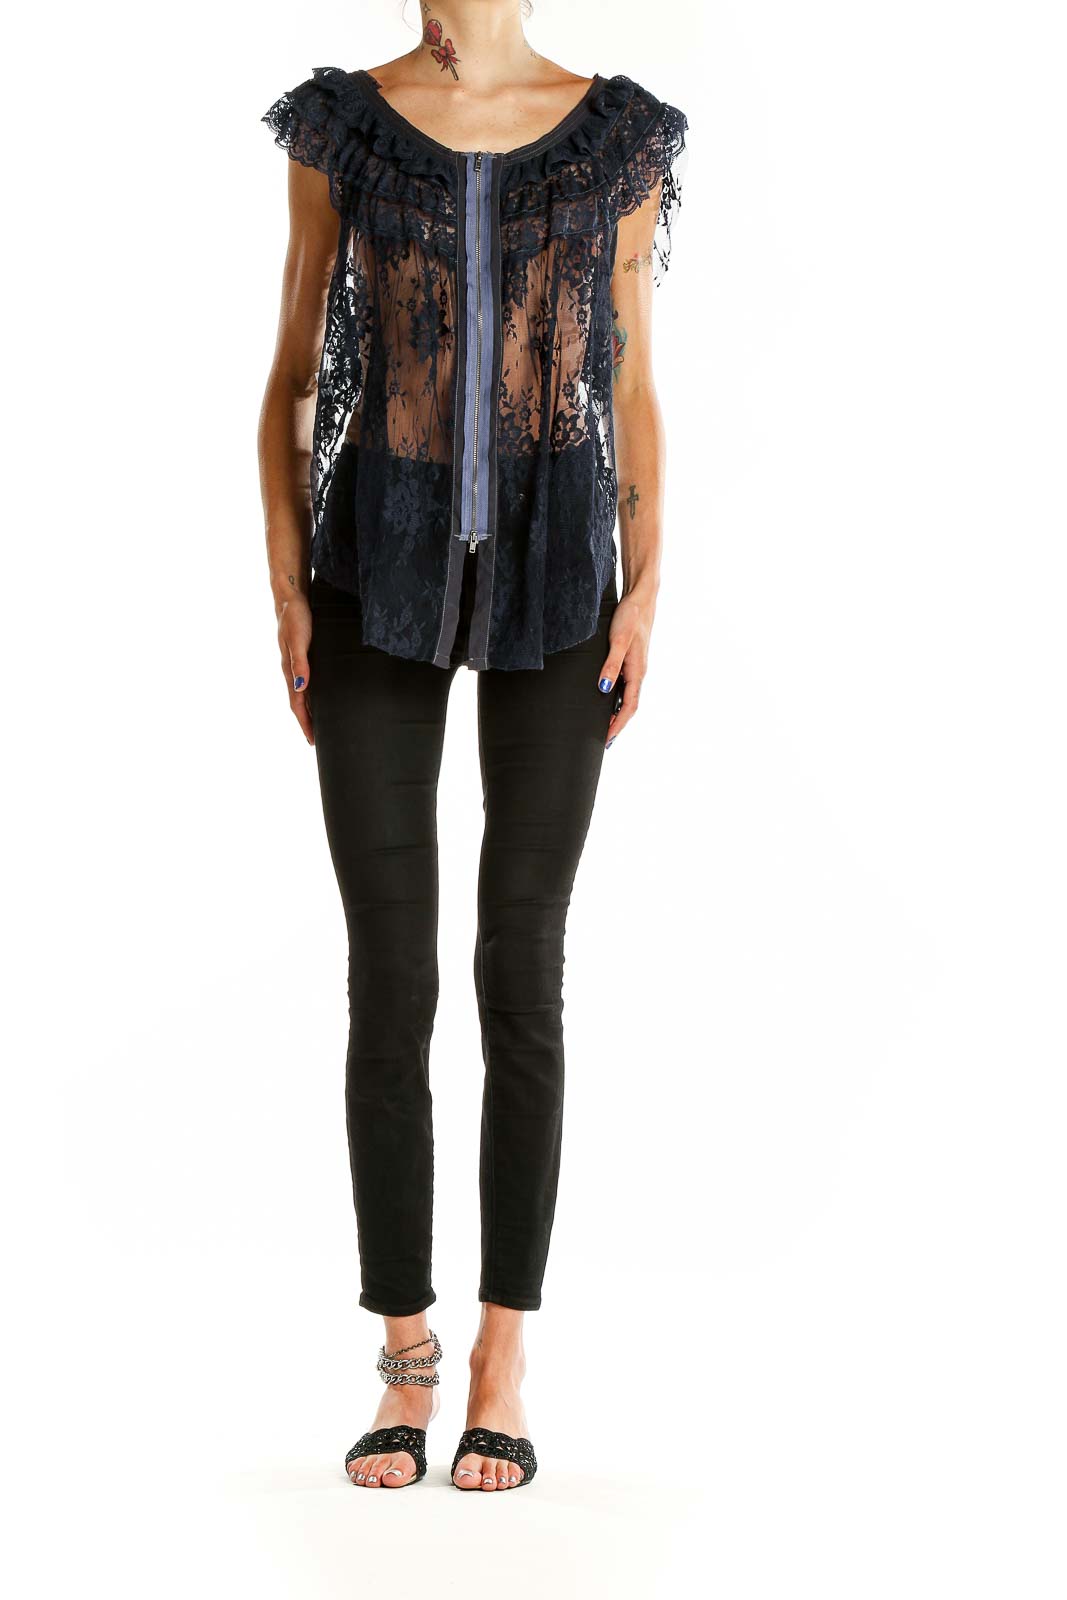 Free People - Blue Lace Zip Up Blouse Unknown | SilkRoll